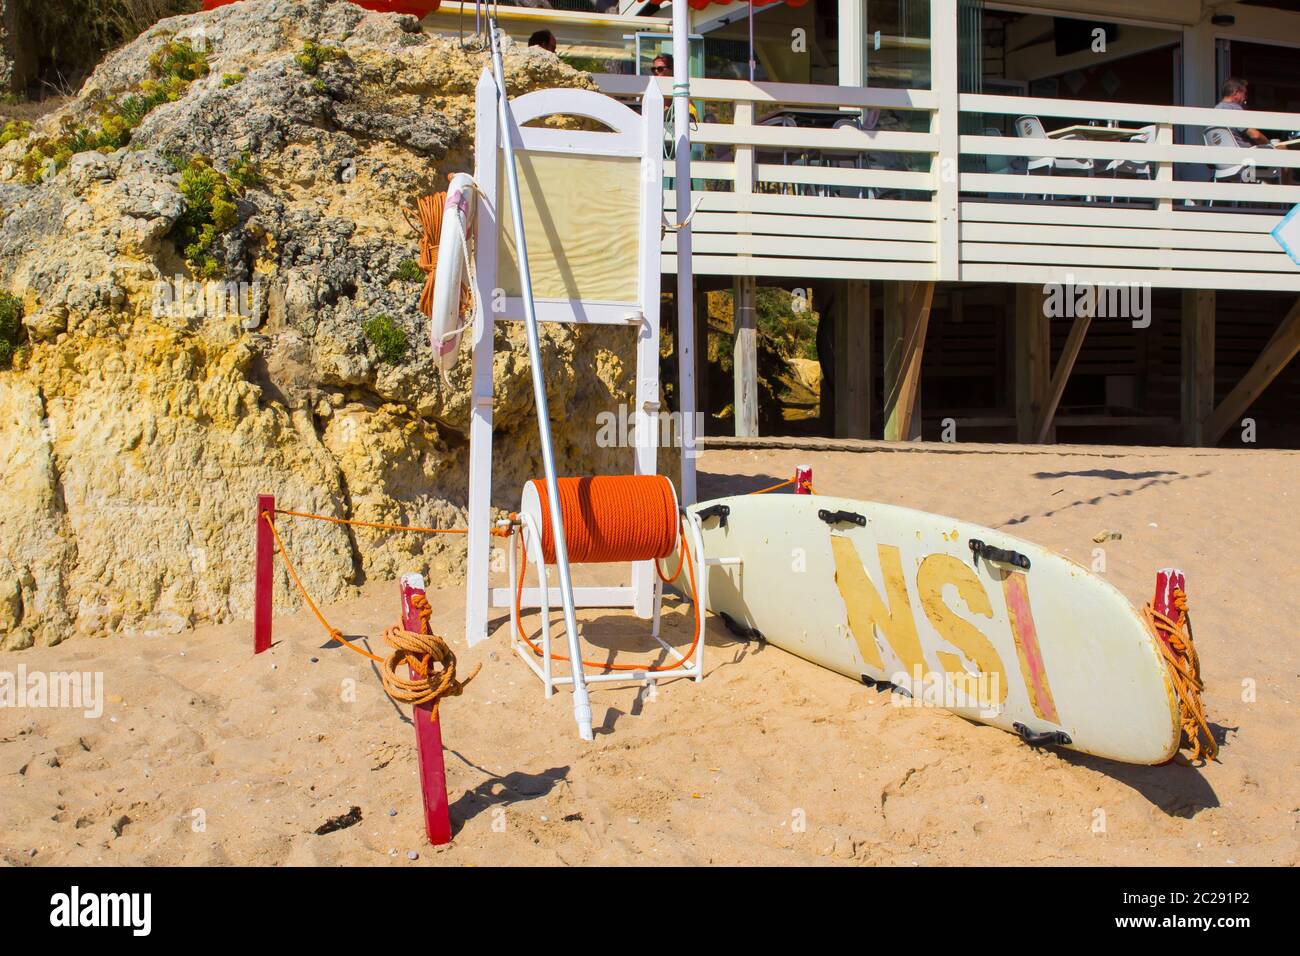 3 October 2018 An unmanned lifeguard station and its equipment on the Oura Praia Beach in Albuferia Portugal on a hot busy afternoon Stock Photo